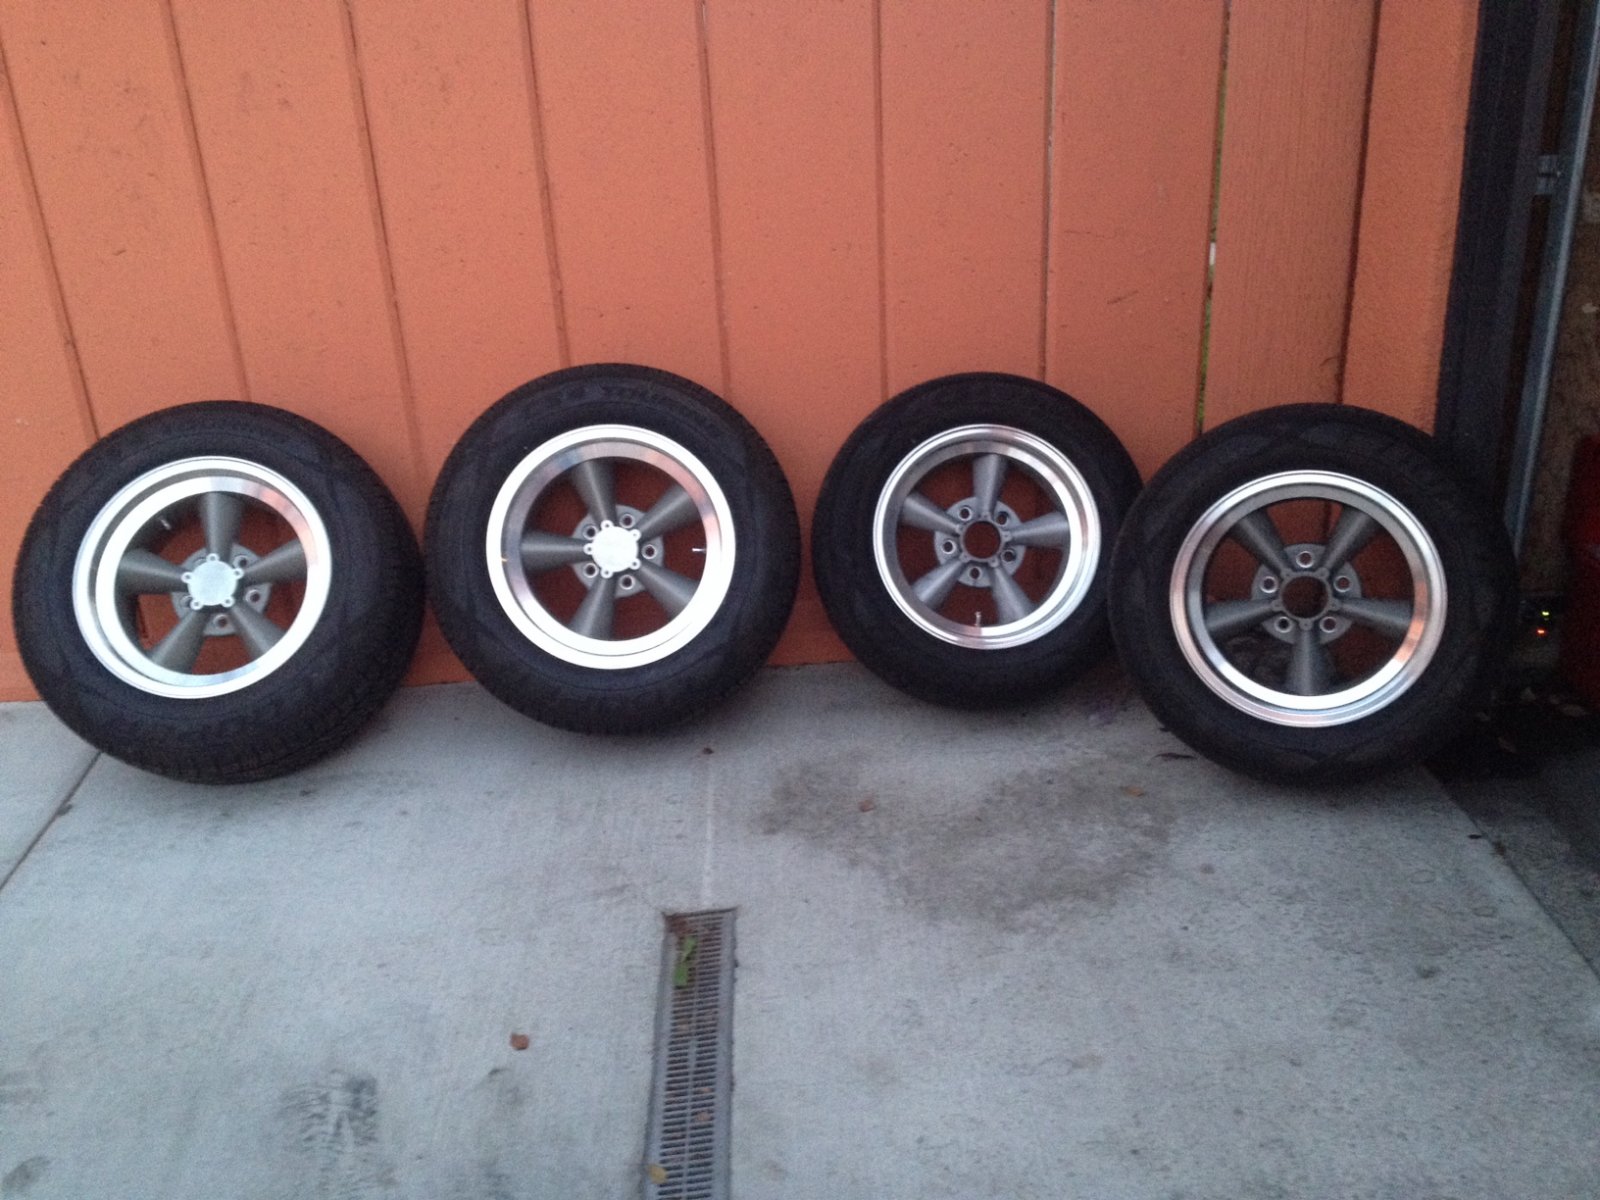 Vintage Wheel Works V40 Wheels with Cooper tires | The H.A.M.B.